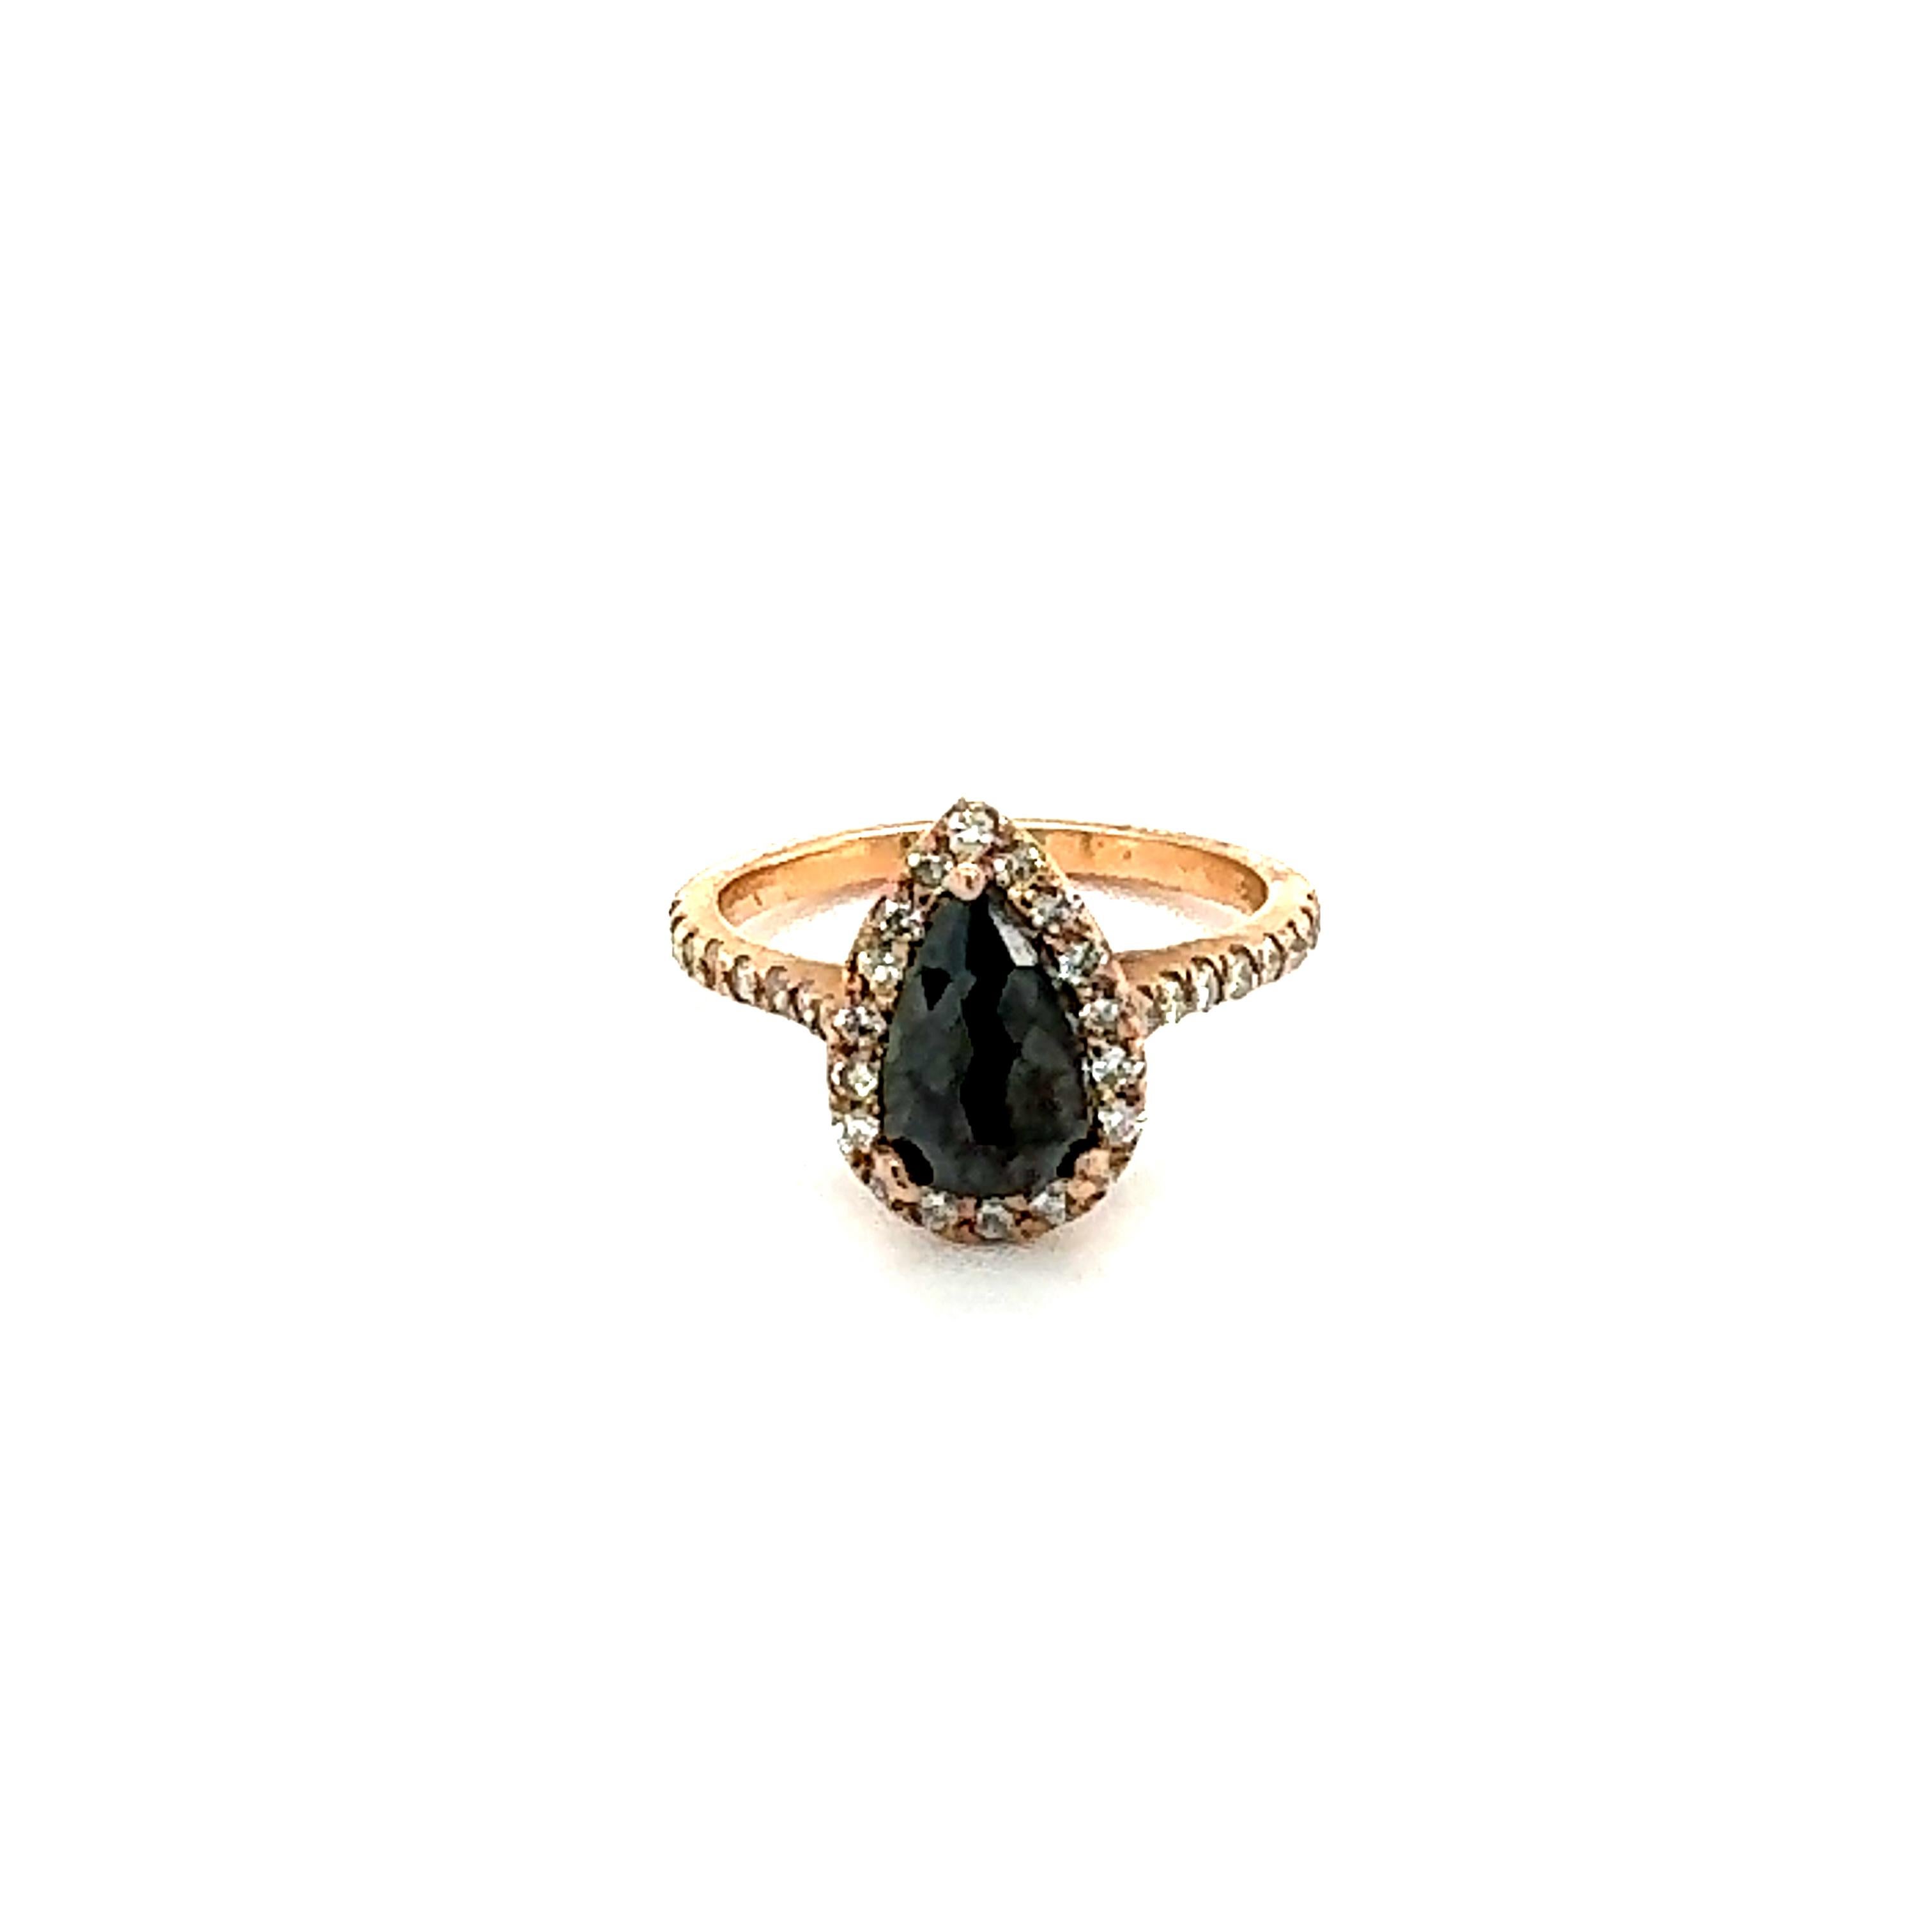 1.51 Carat Pear Cut Black Diamond 14 Karat Rose Gold Engagement Ring
Gorgeous Black Diamond ring that can transform into an Engagement ring!! 

There is a 1.09 Carat Pear Cut Black Diamond in the center on the ring which is surrounded by a Halo of 